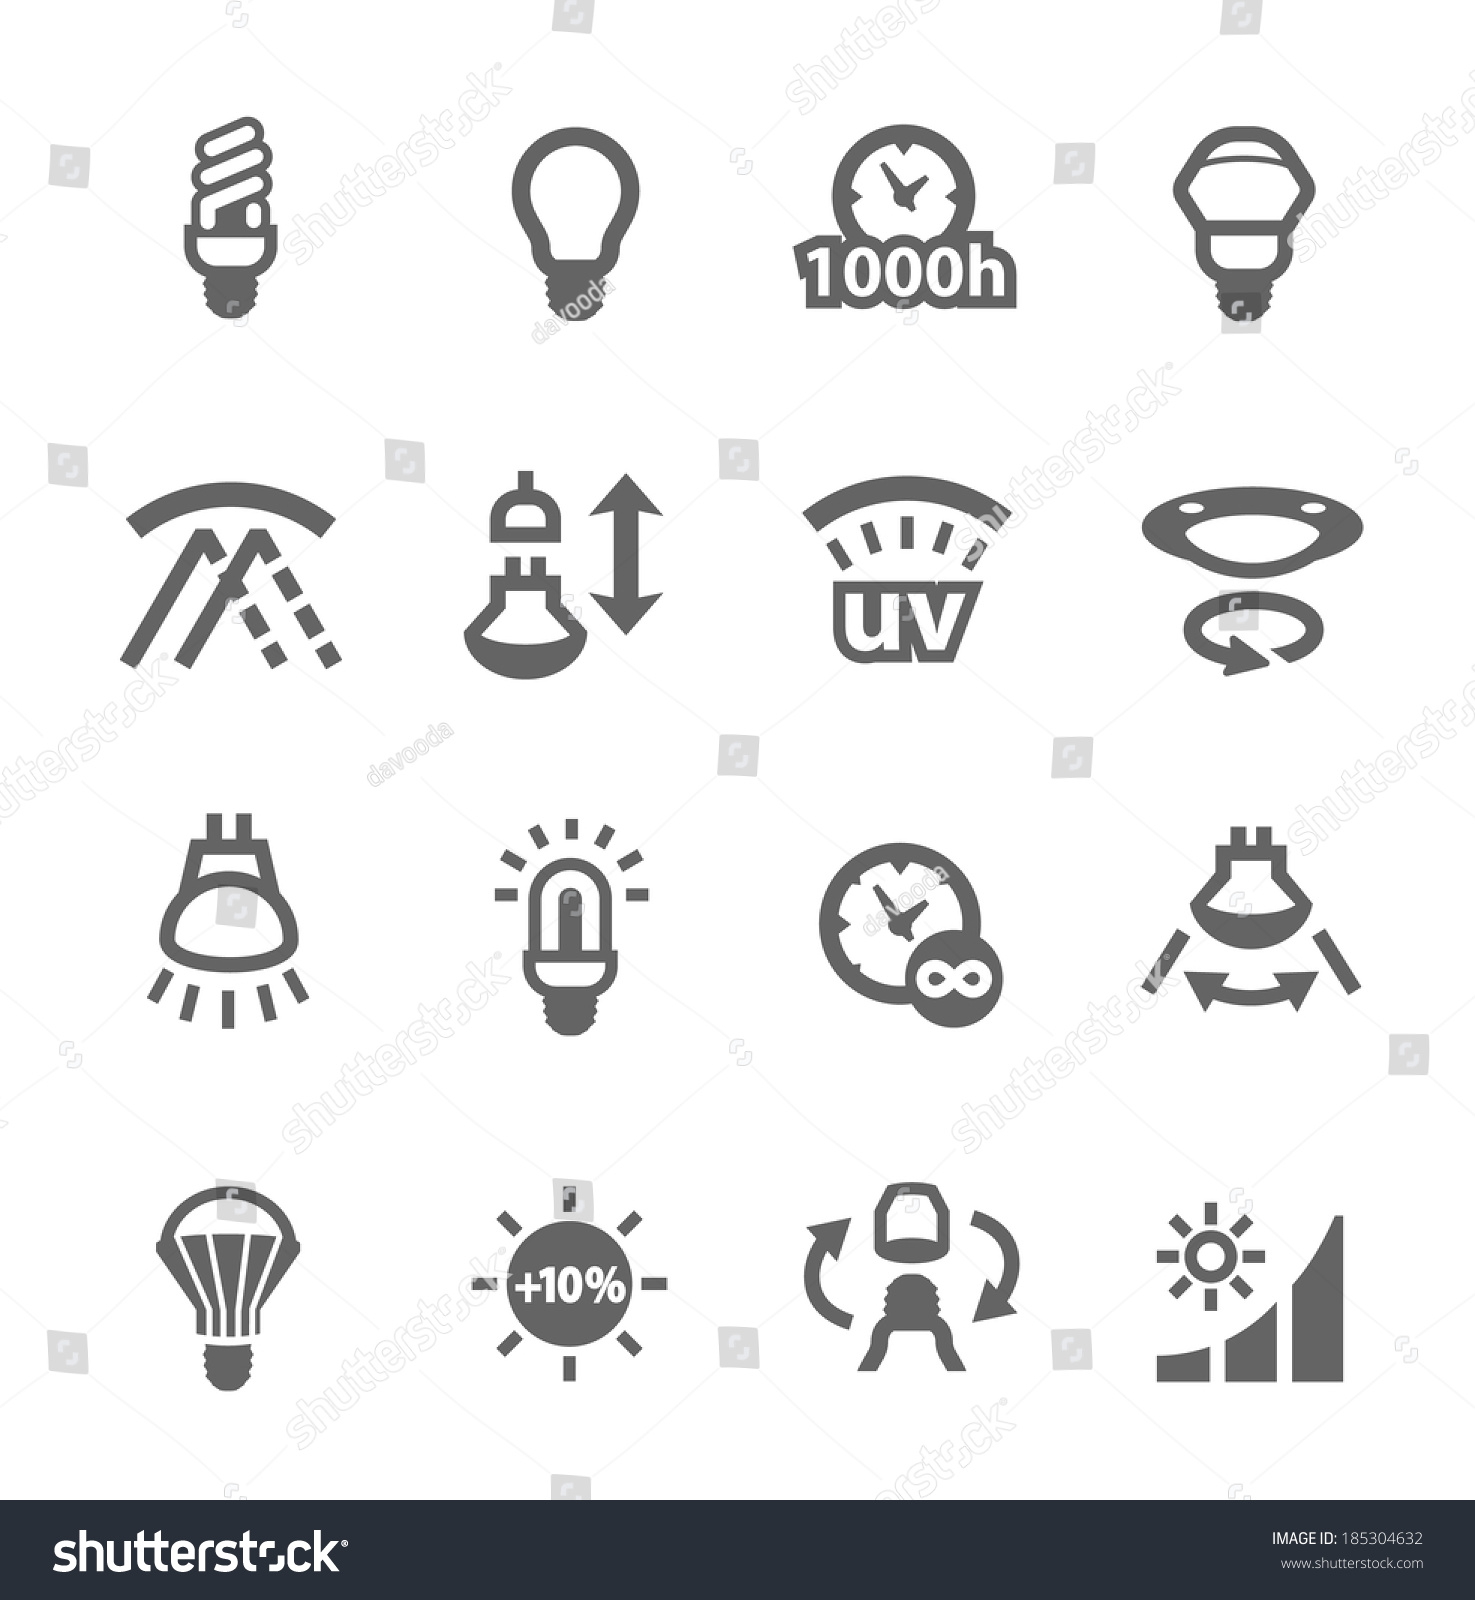 Simple set of lamp features related vector icons for your design #185304632